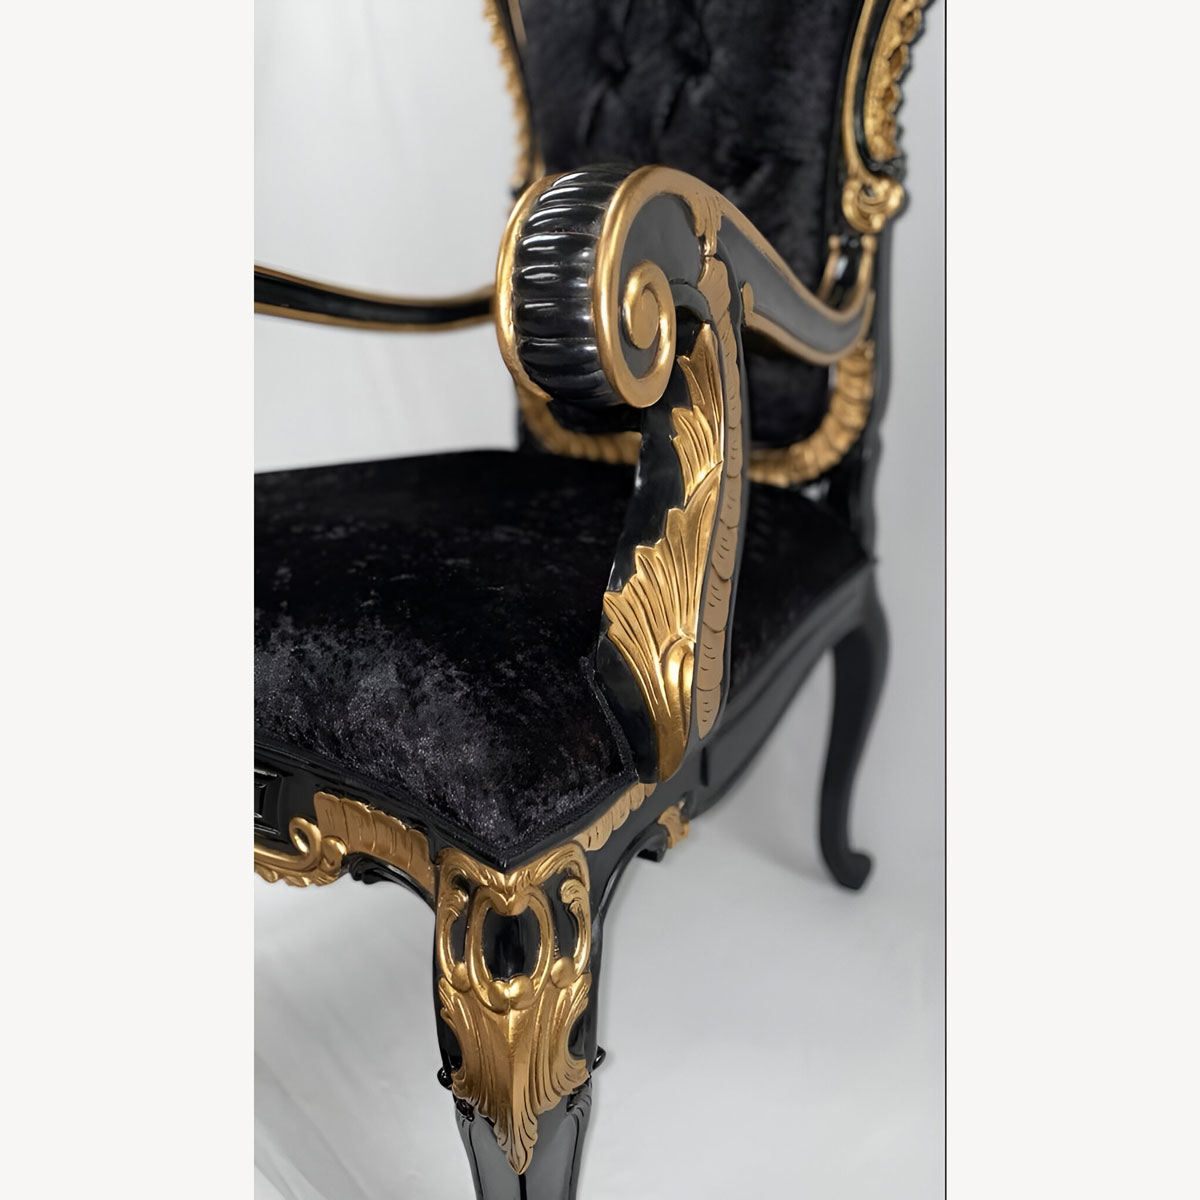 Emperor Great Large Unique Throne Chair In Black Finish With Hand Applied Gold Detailing And Upholstered In A Black Crushed Velvet 4 - Hampshire Barn Interiors - Emperor Great Large Unique Throne Chair In Black Finish With Hand Applied Gold Detailing And Upholstered In A Black Crushed Velvet -